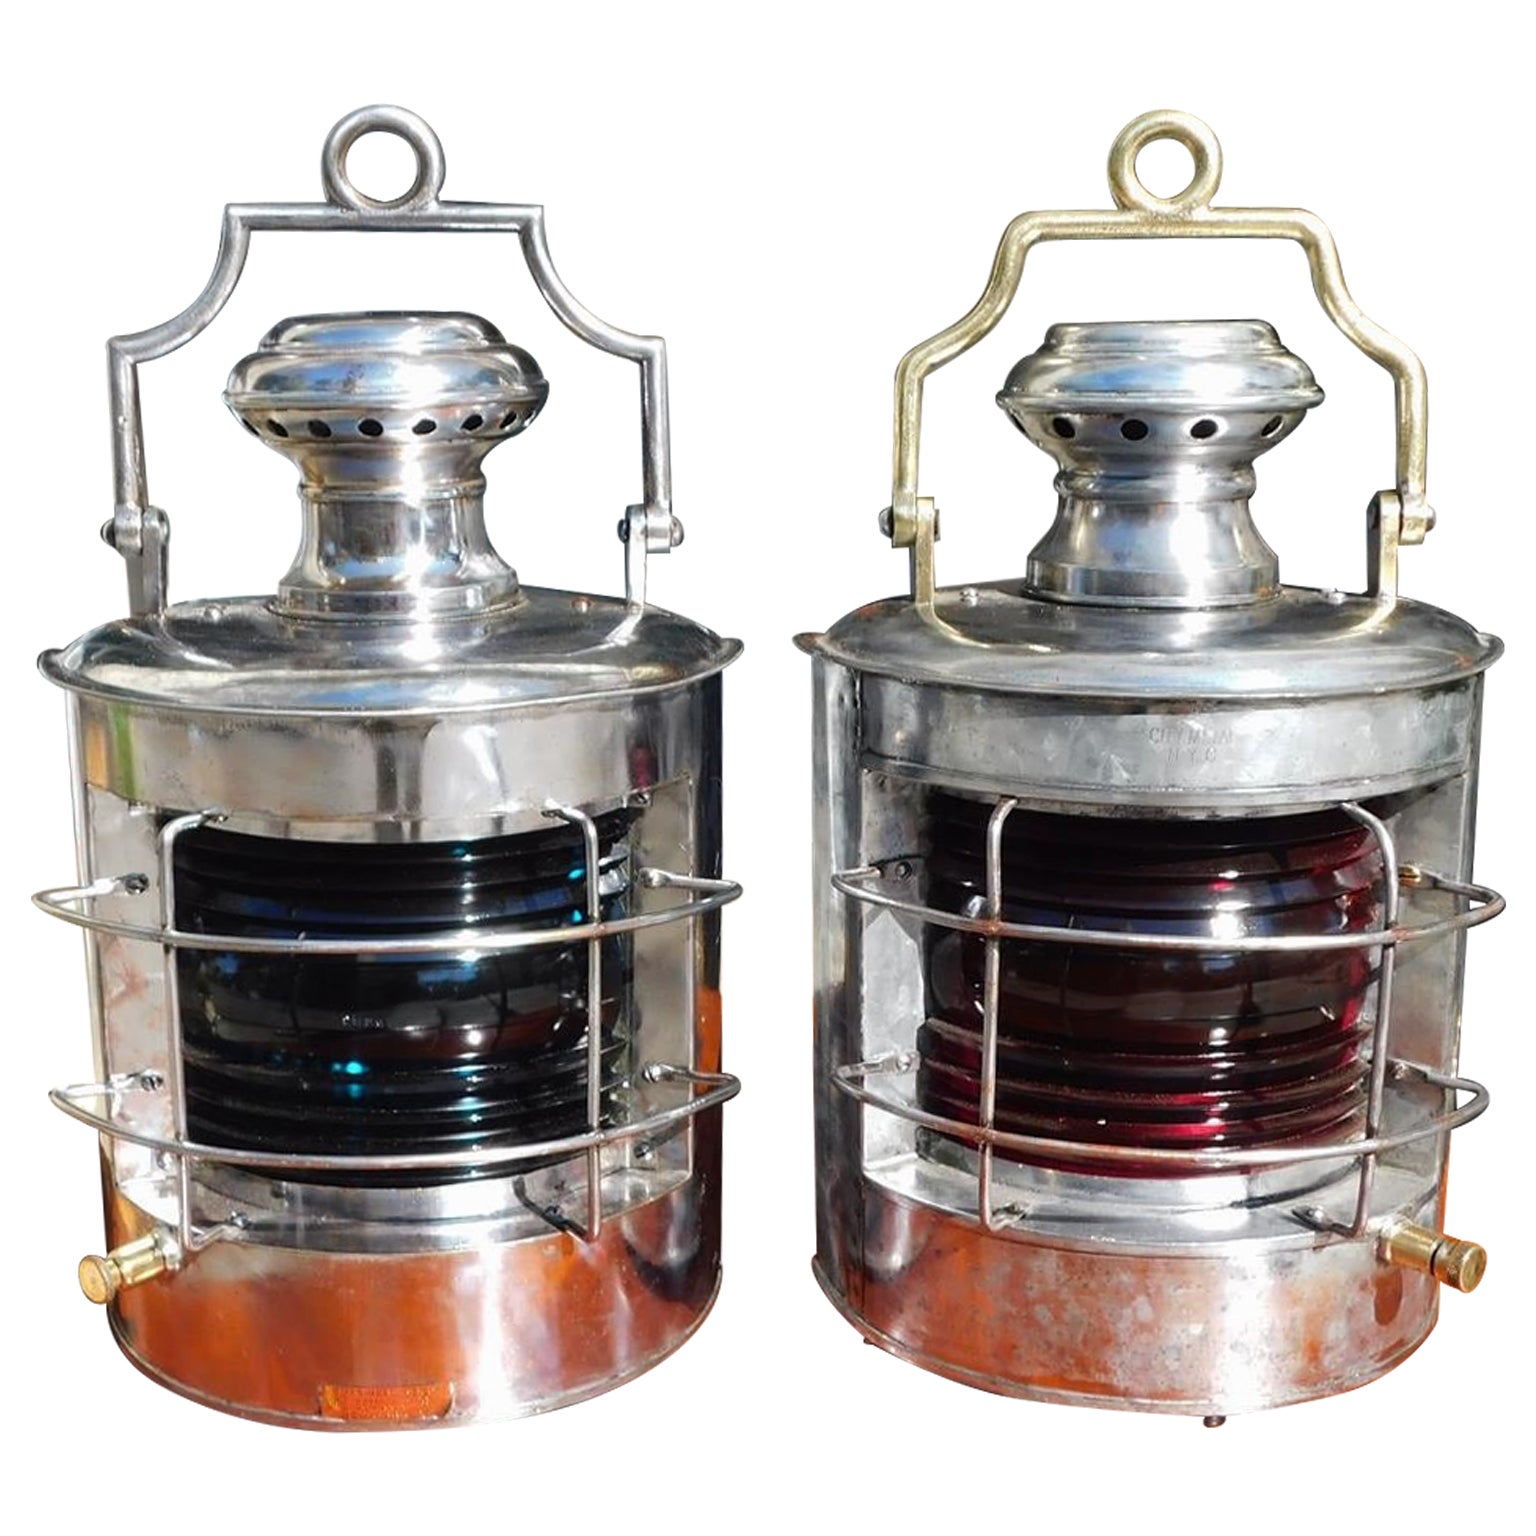 Ship's Anchor Lantern of Copper and Brass with Fresnel Glass Lens